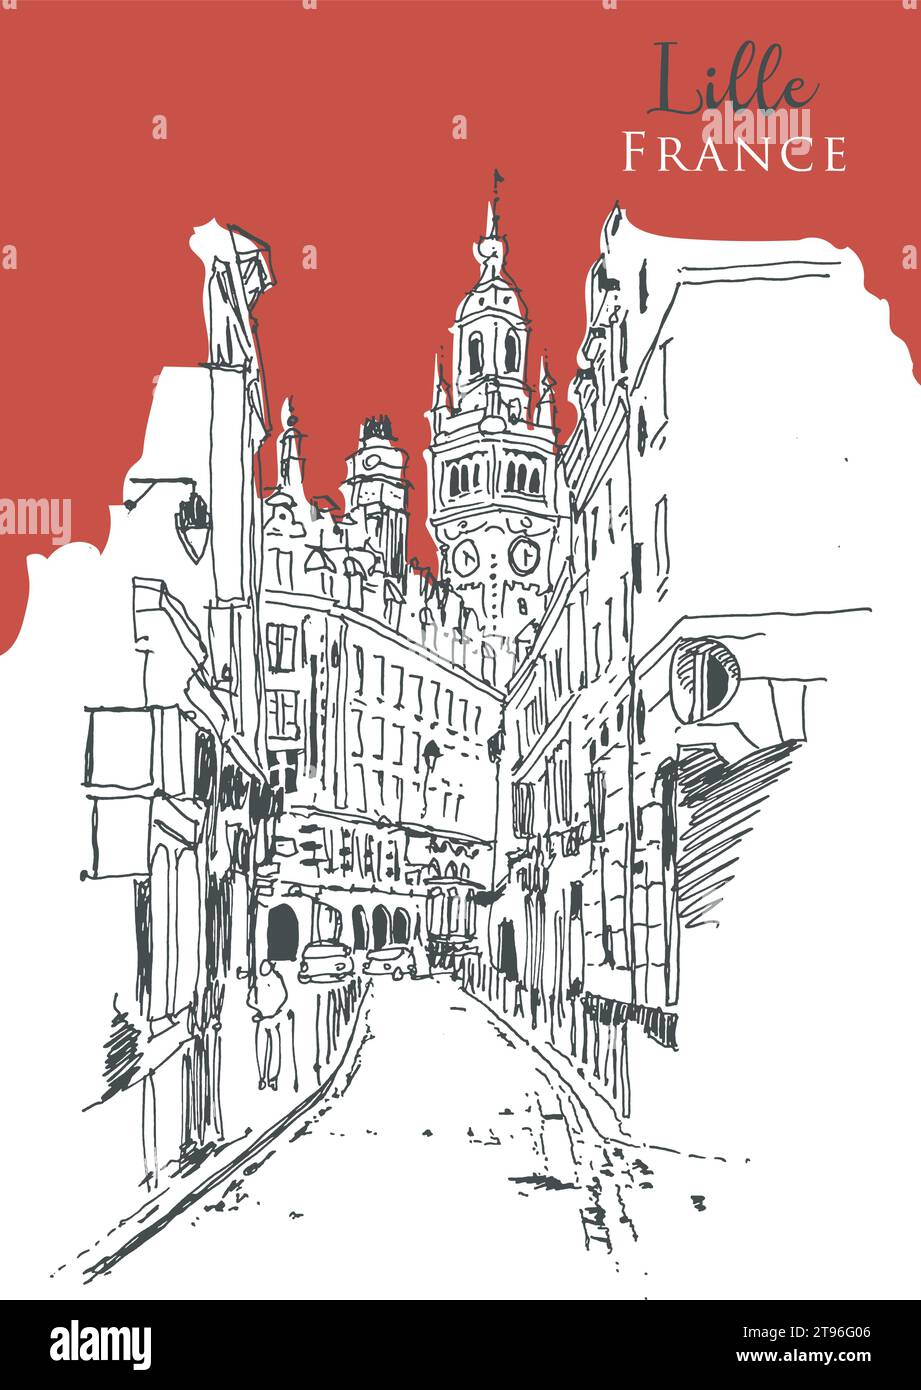 Vector hand drawn sketch illustration of Lille, with the tower of the Lille town hall, France Stock Vector